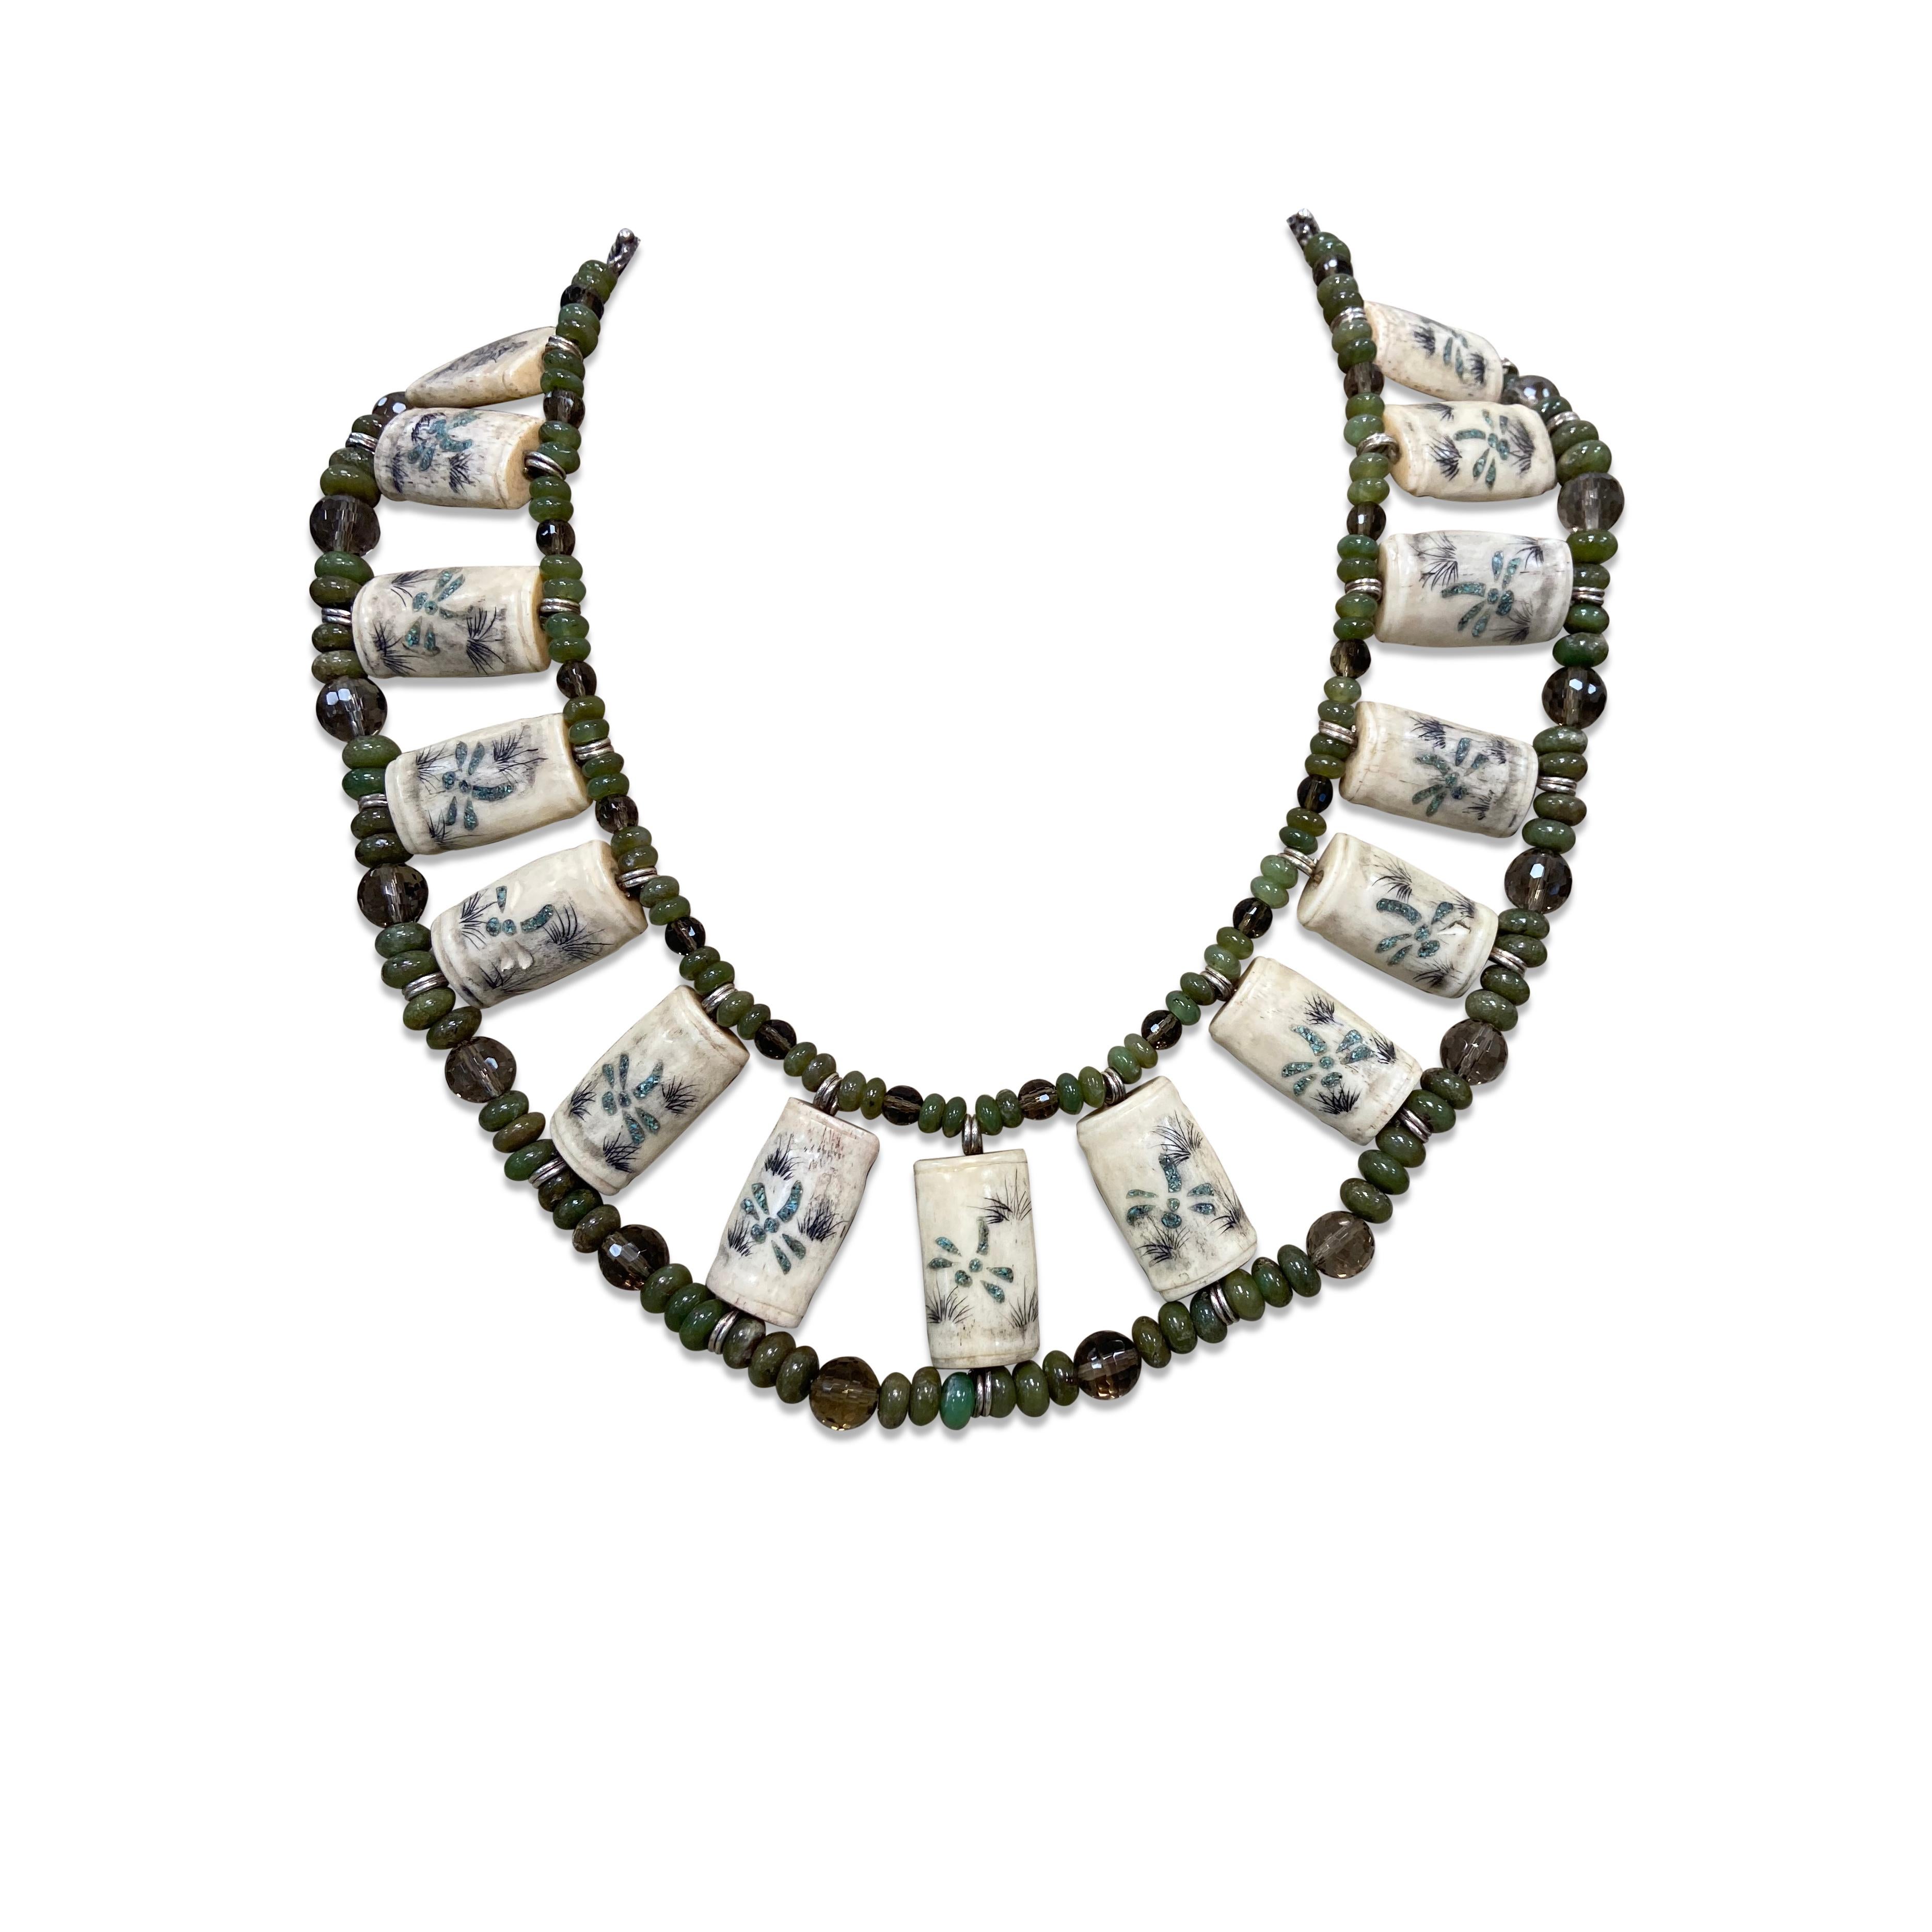 Round Cut Stephen Dweck Inlaid Turquoise Choker Necklace with Bone Tile 